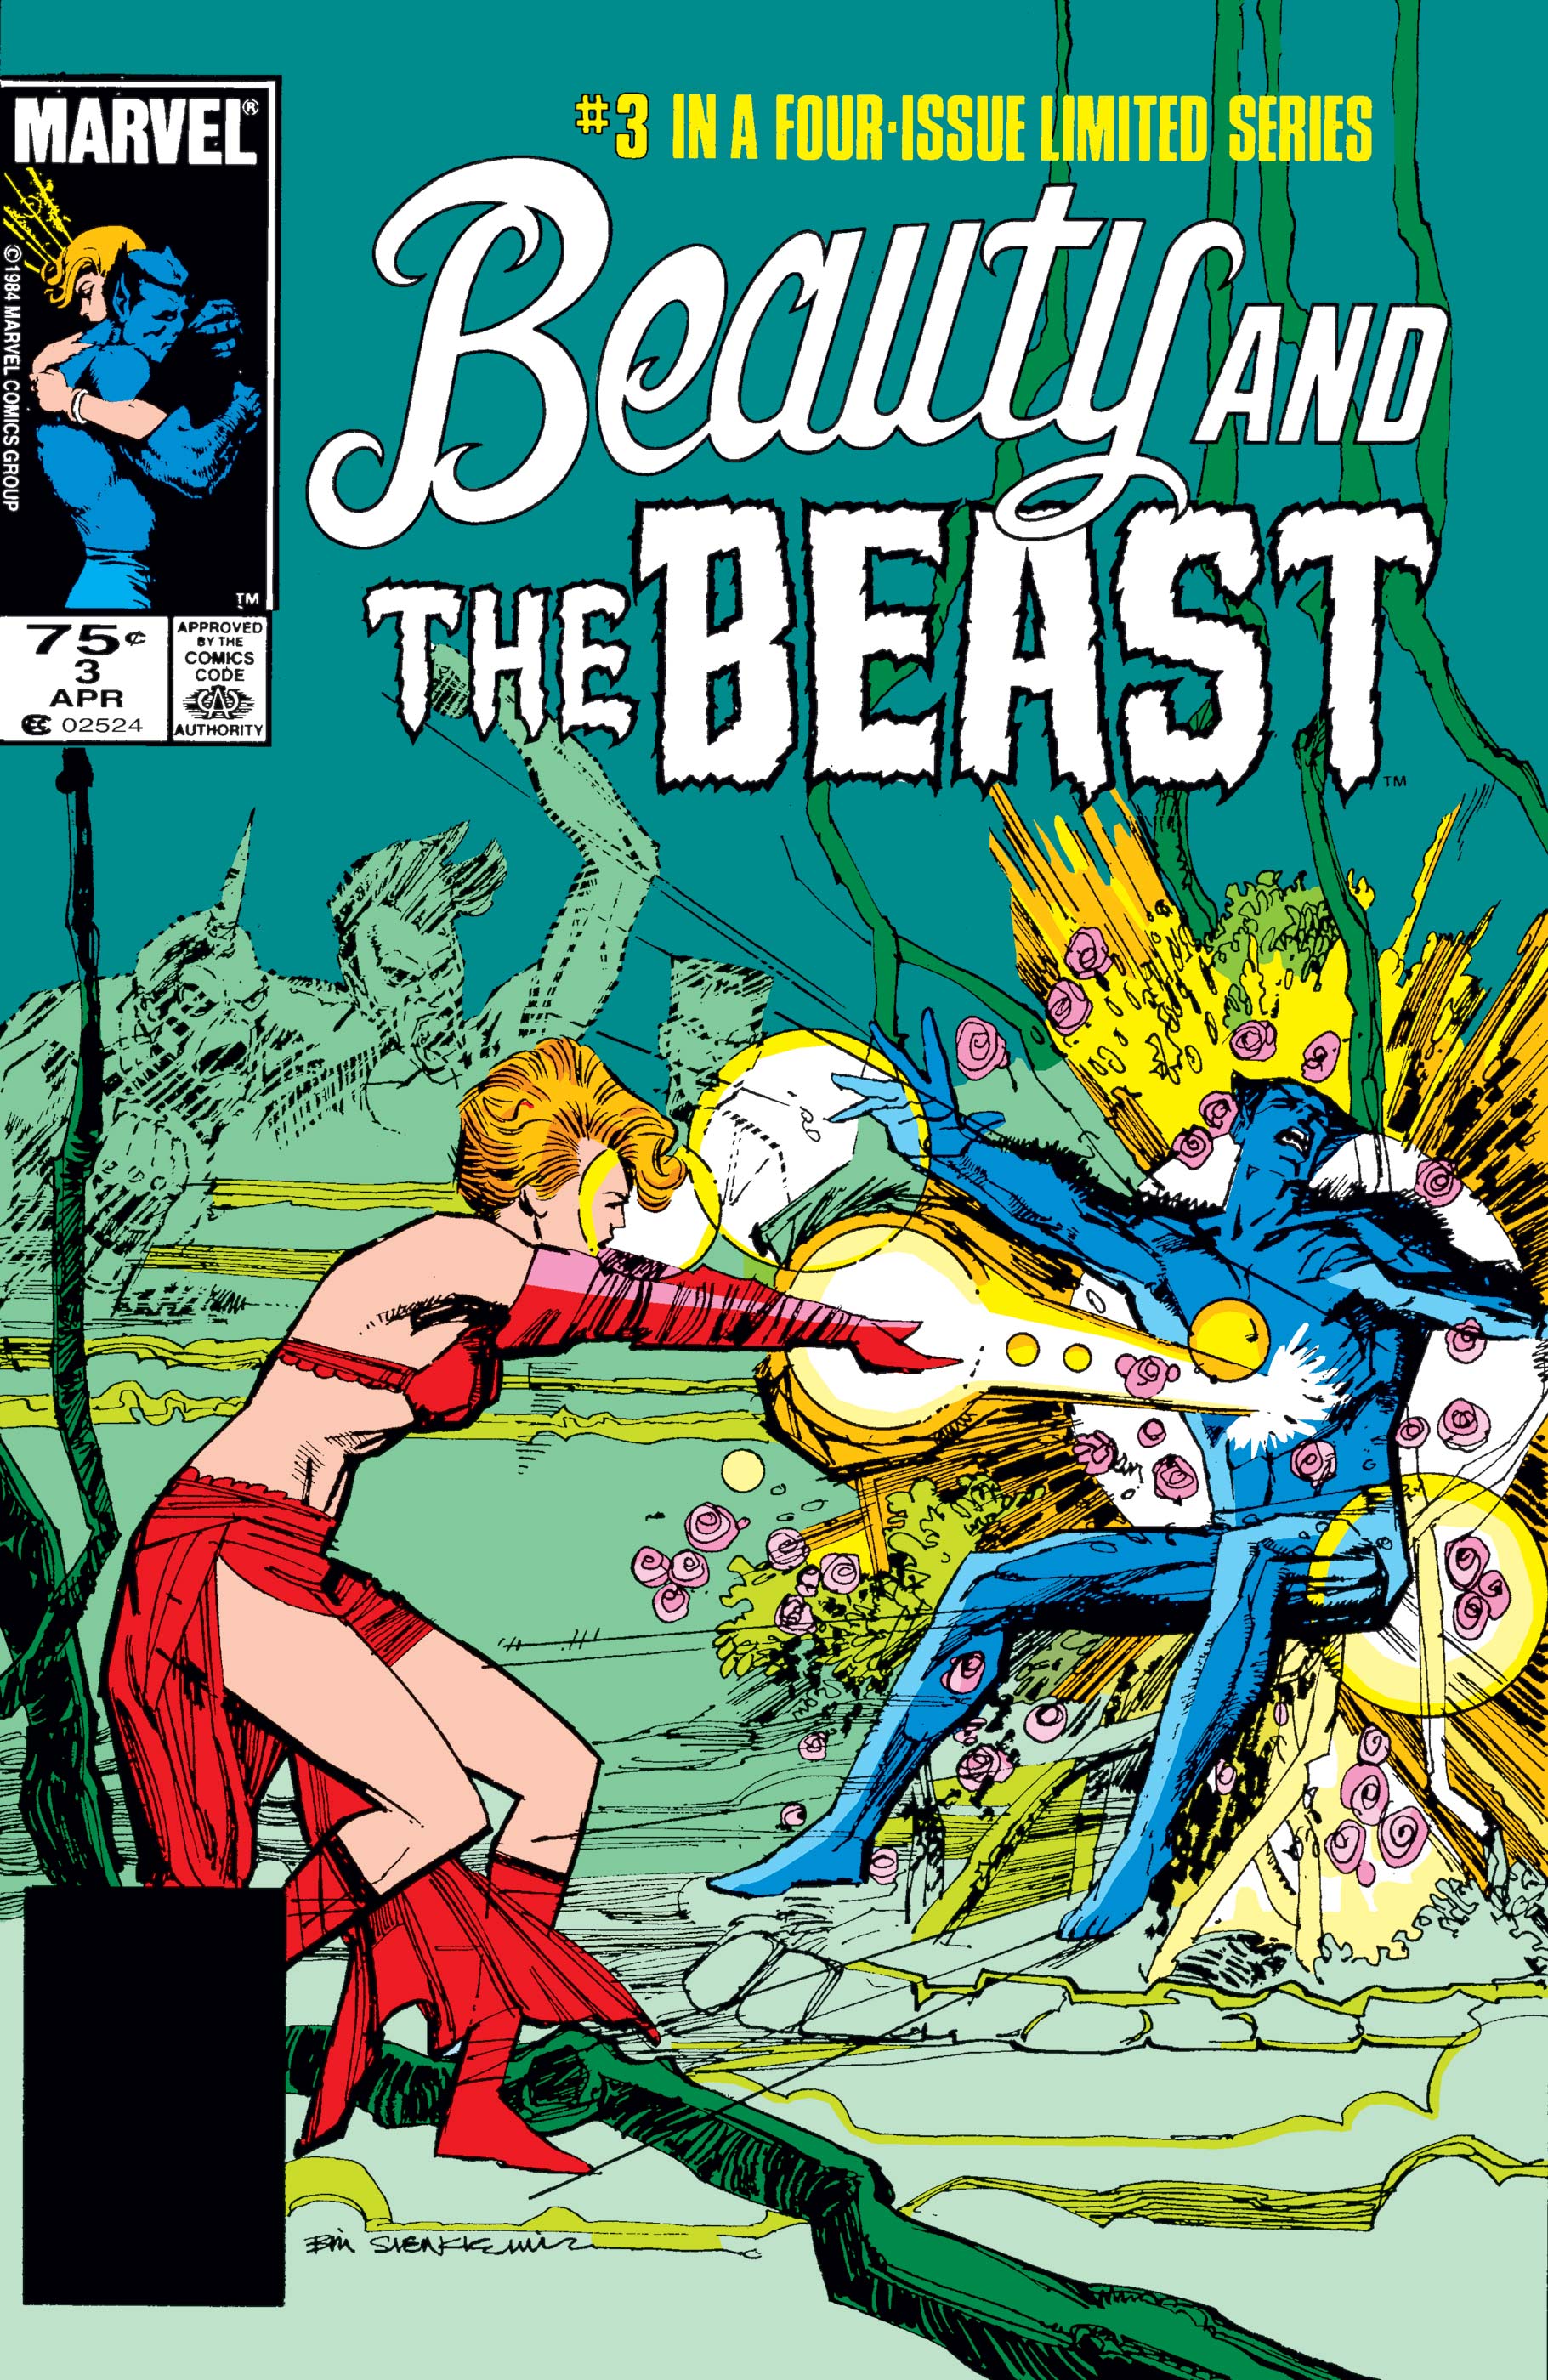 And beast comic the beauty Beauty and